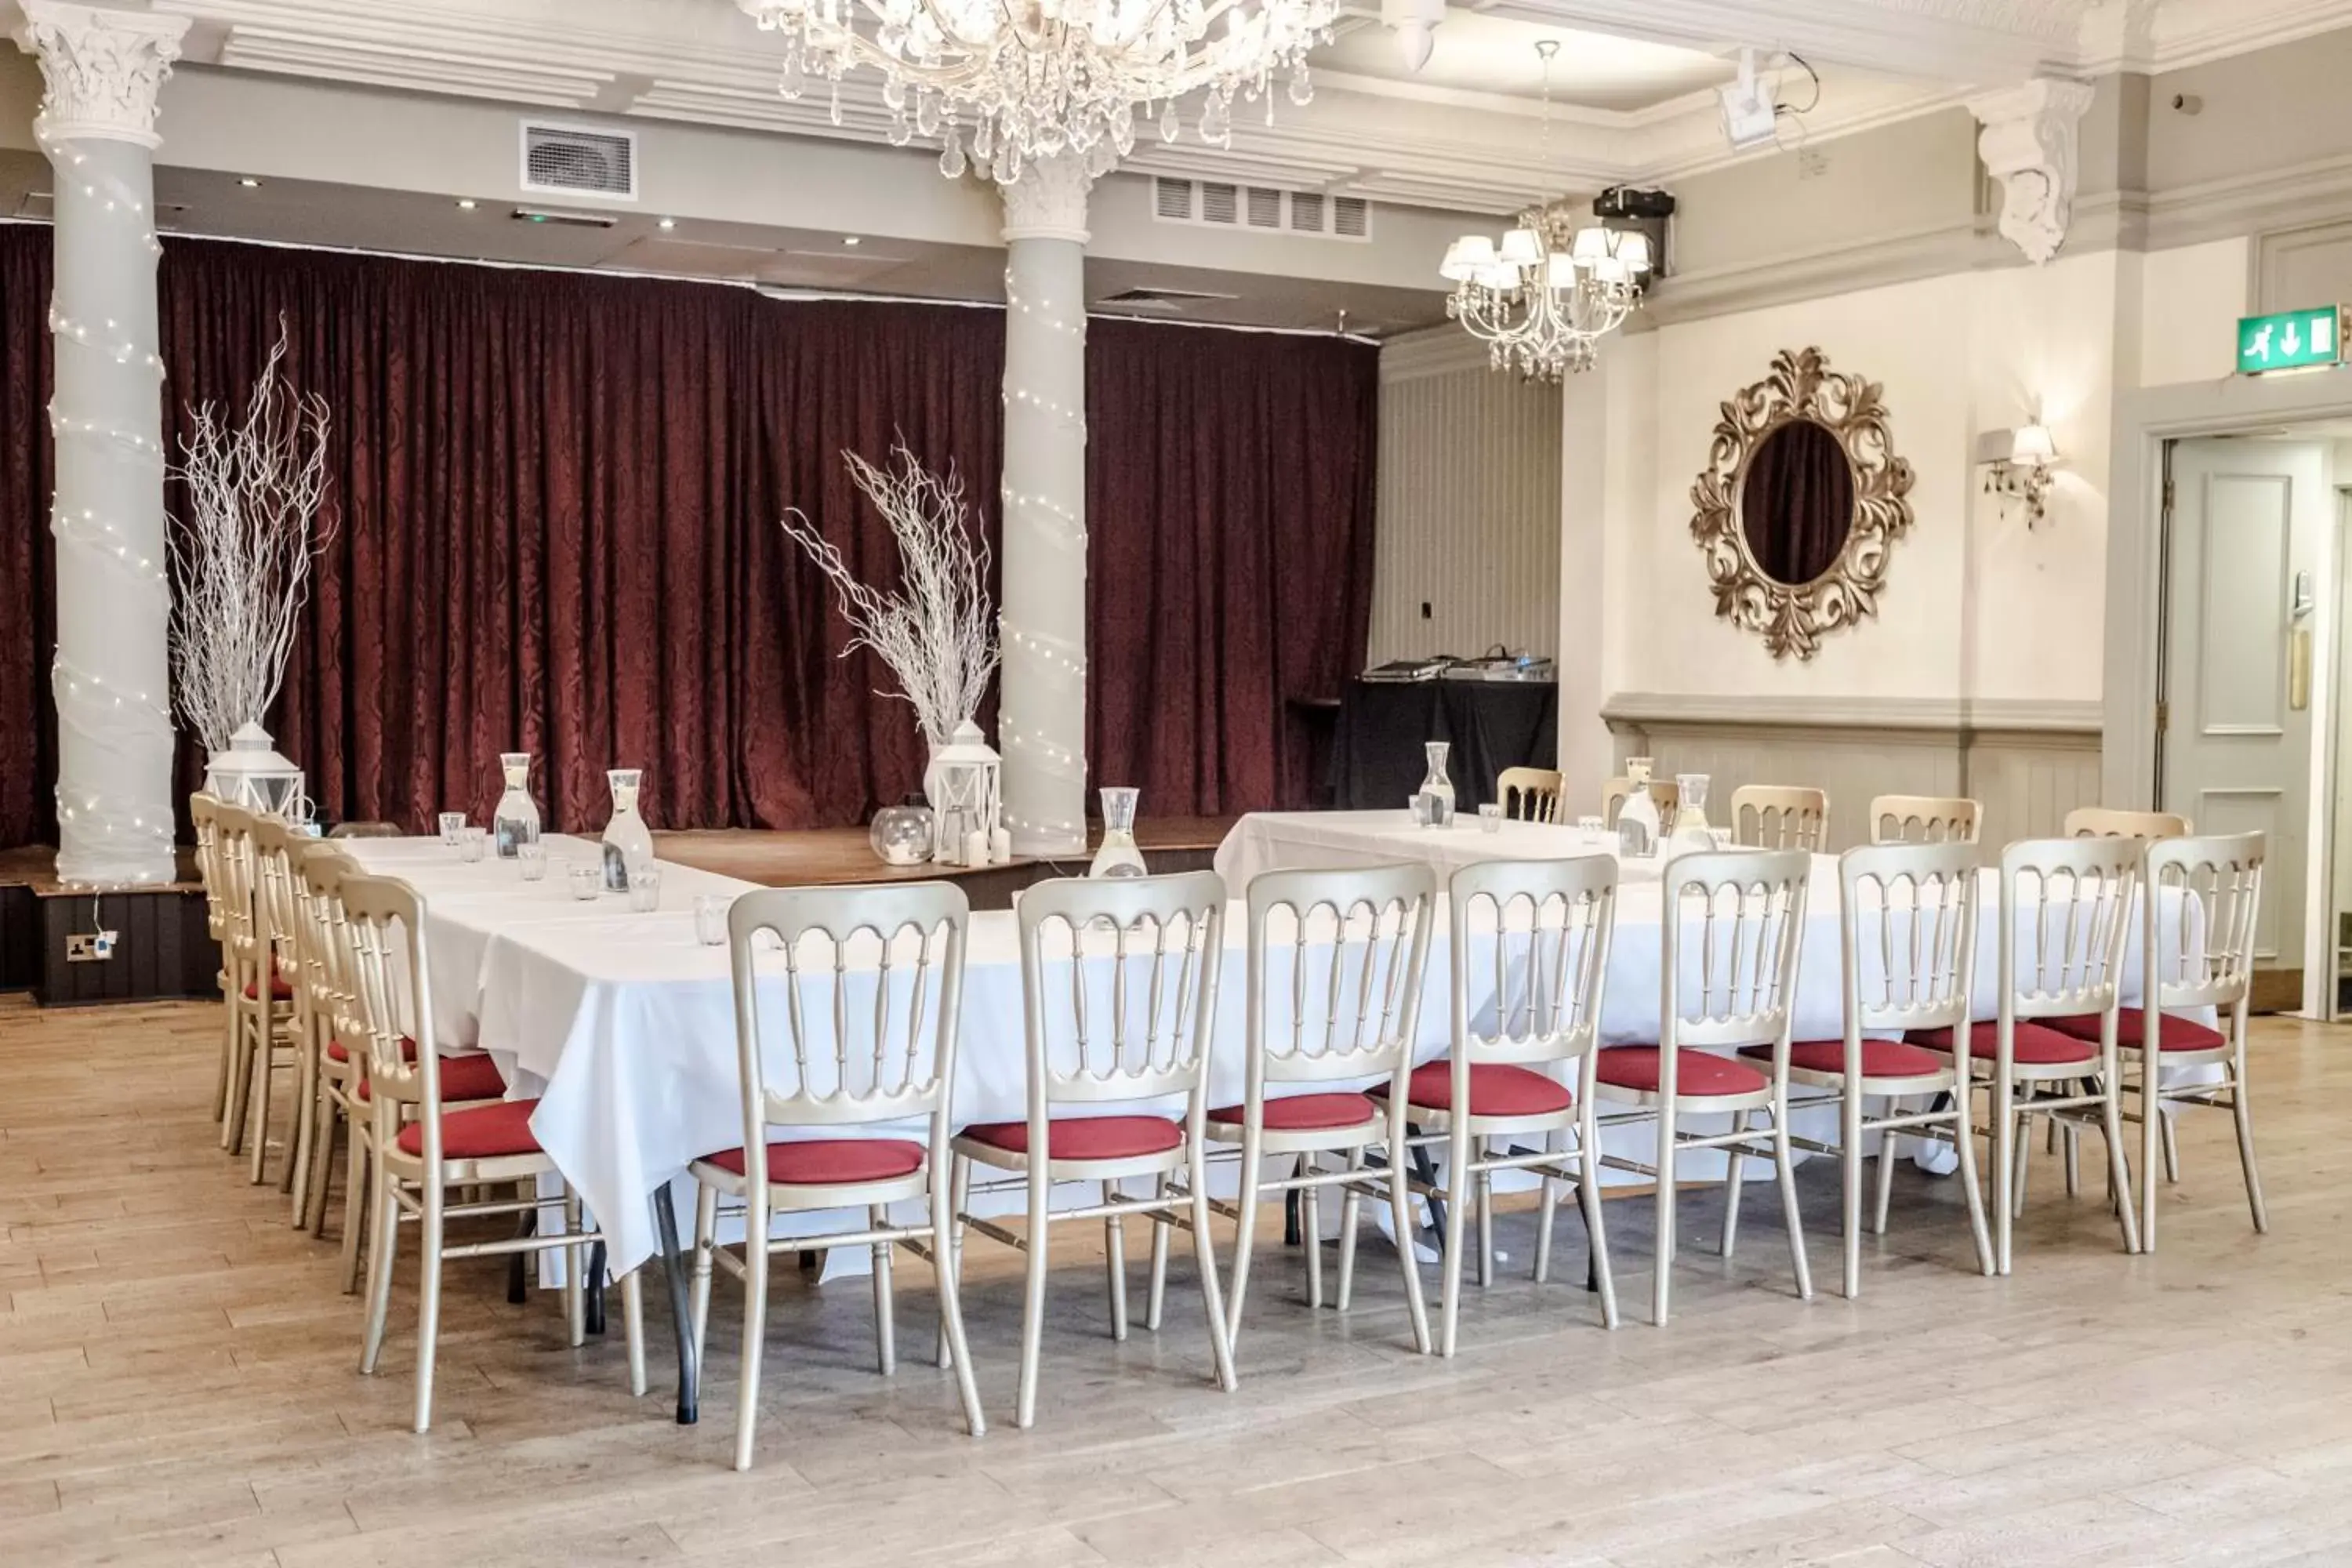 Business facilities, Banquet Facilities in The Drayton Court Hotel